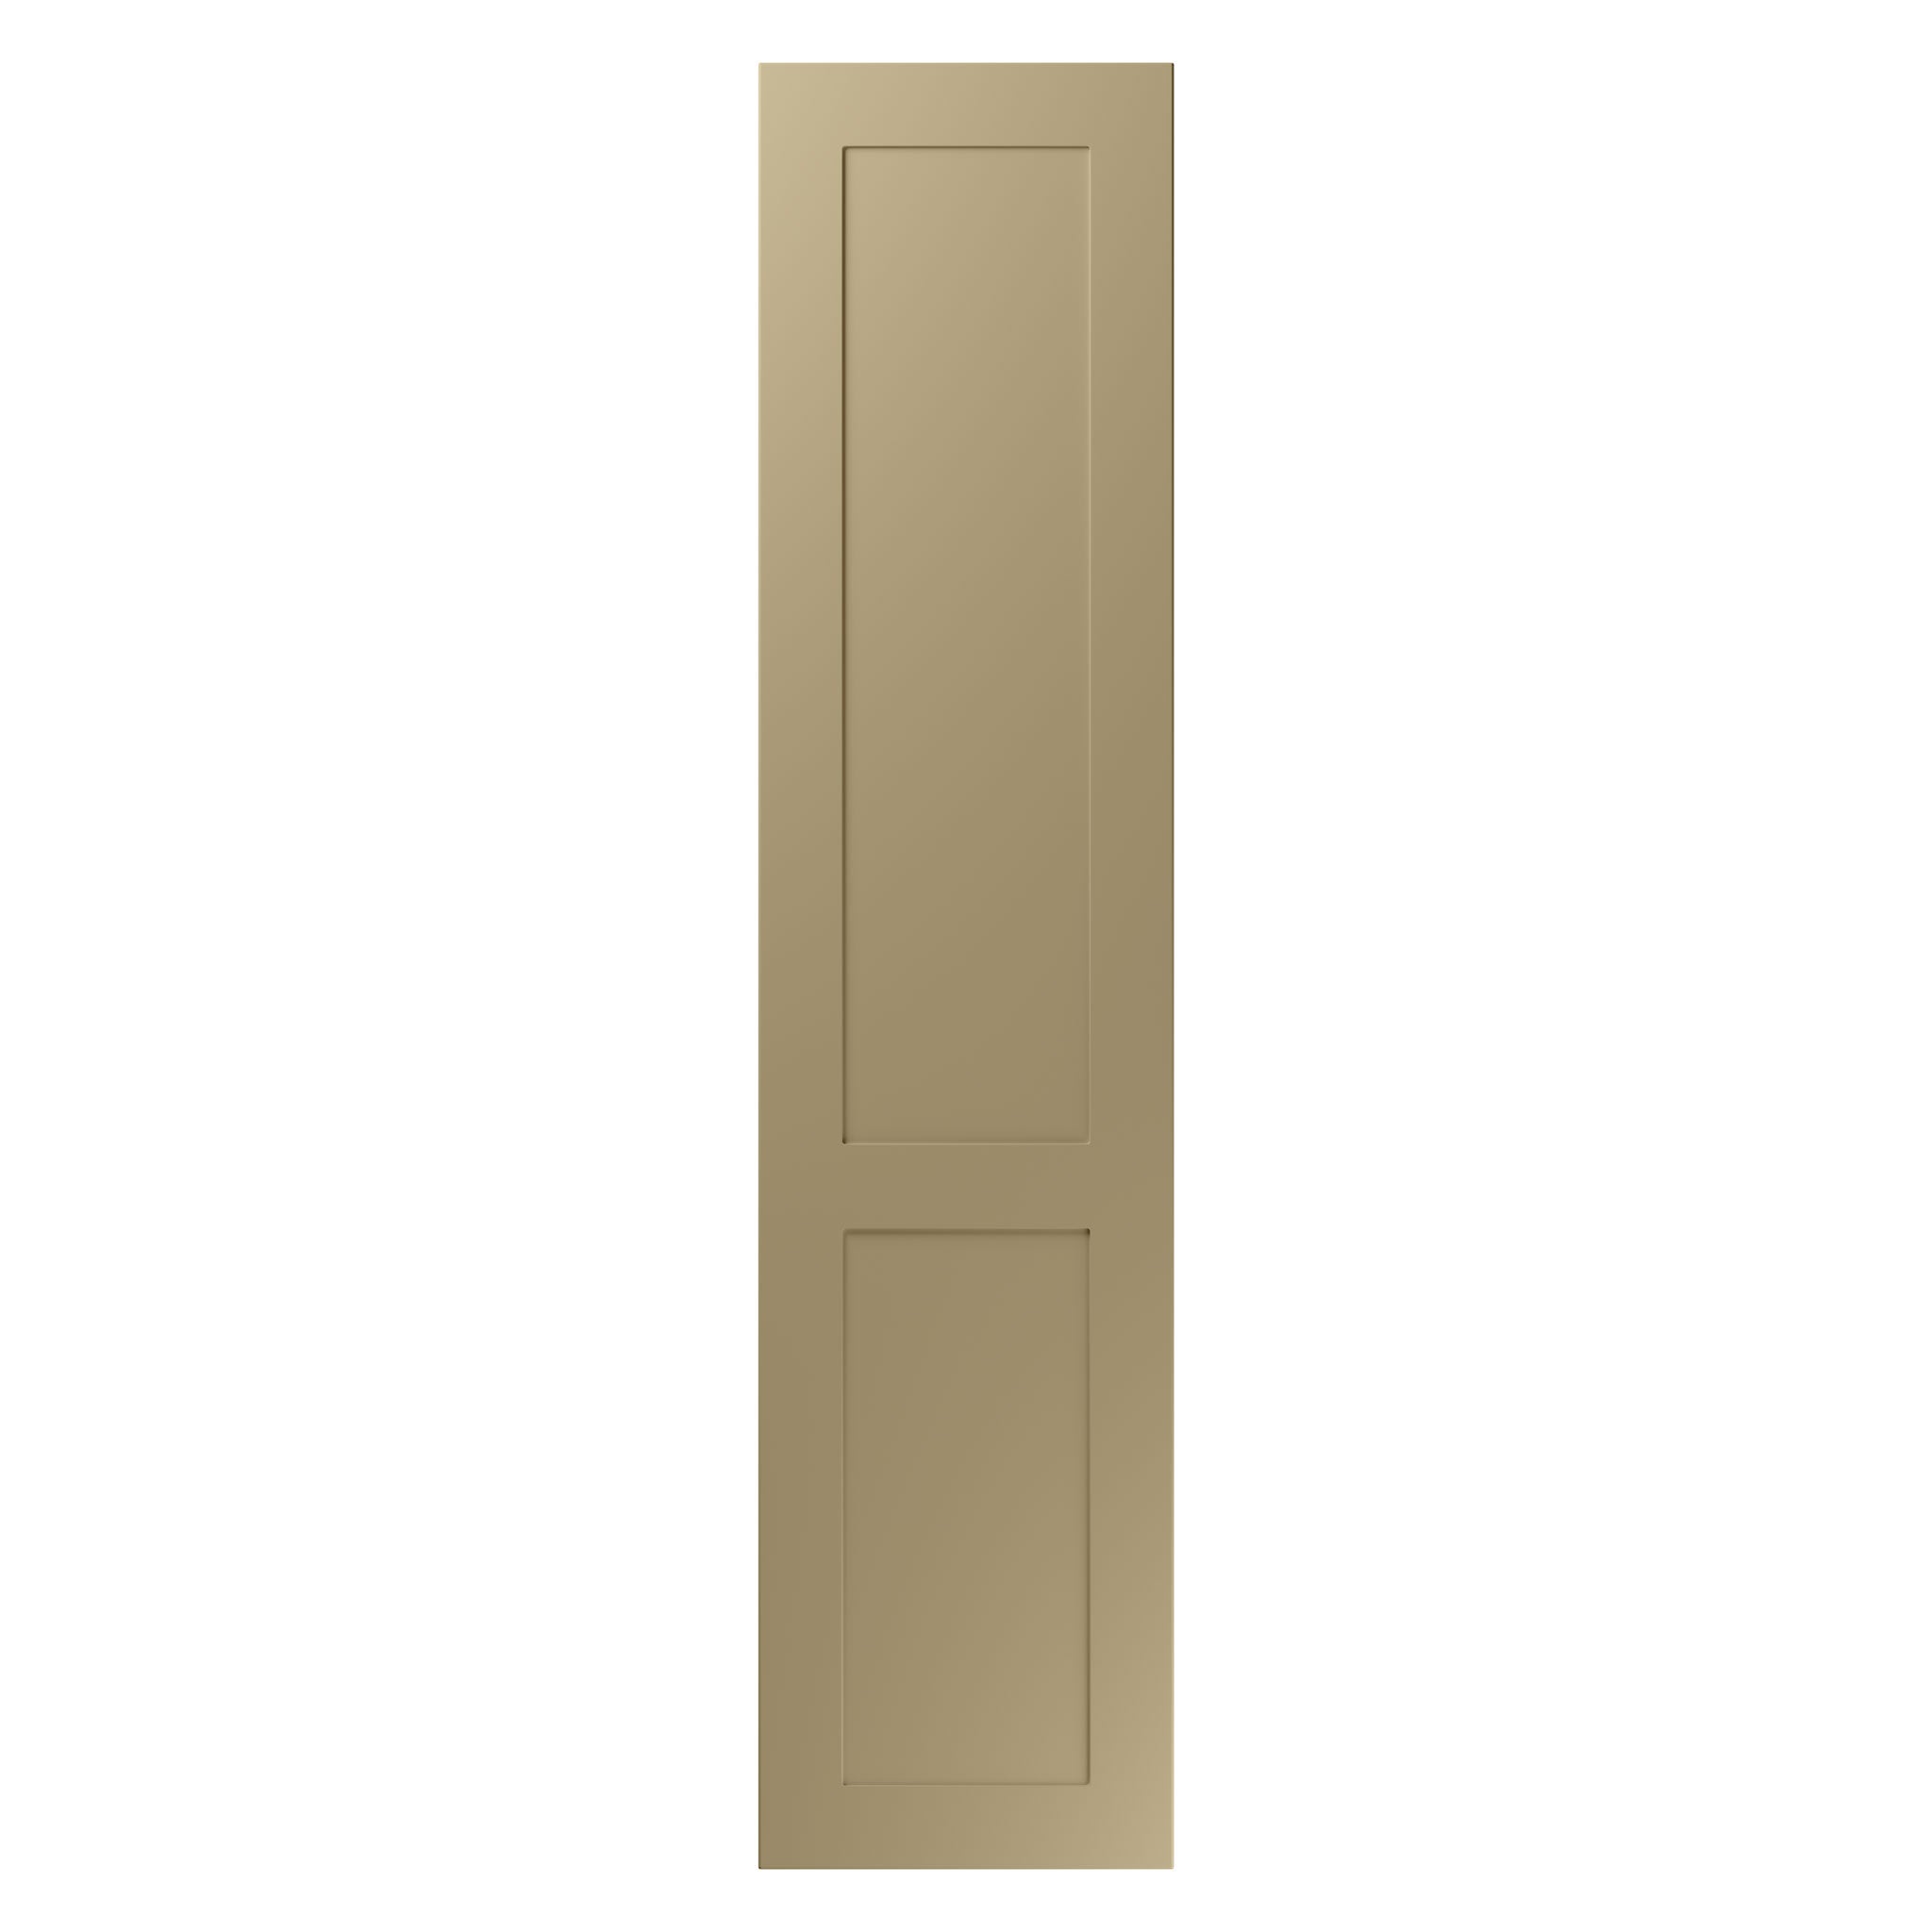 Traditional shaker style door in any colour